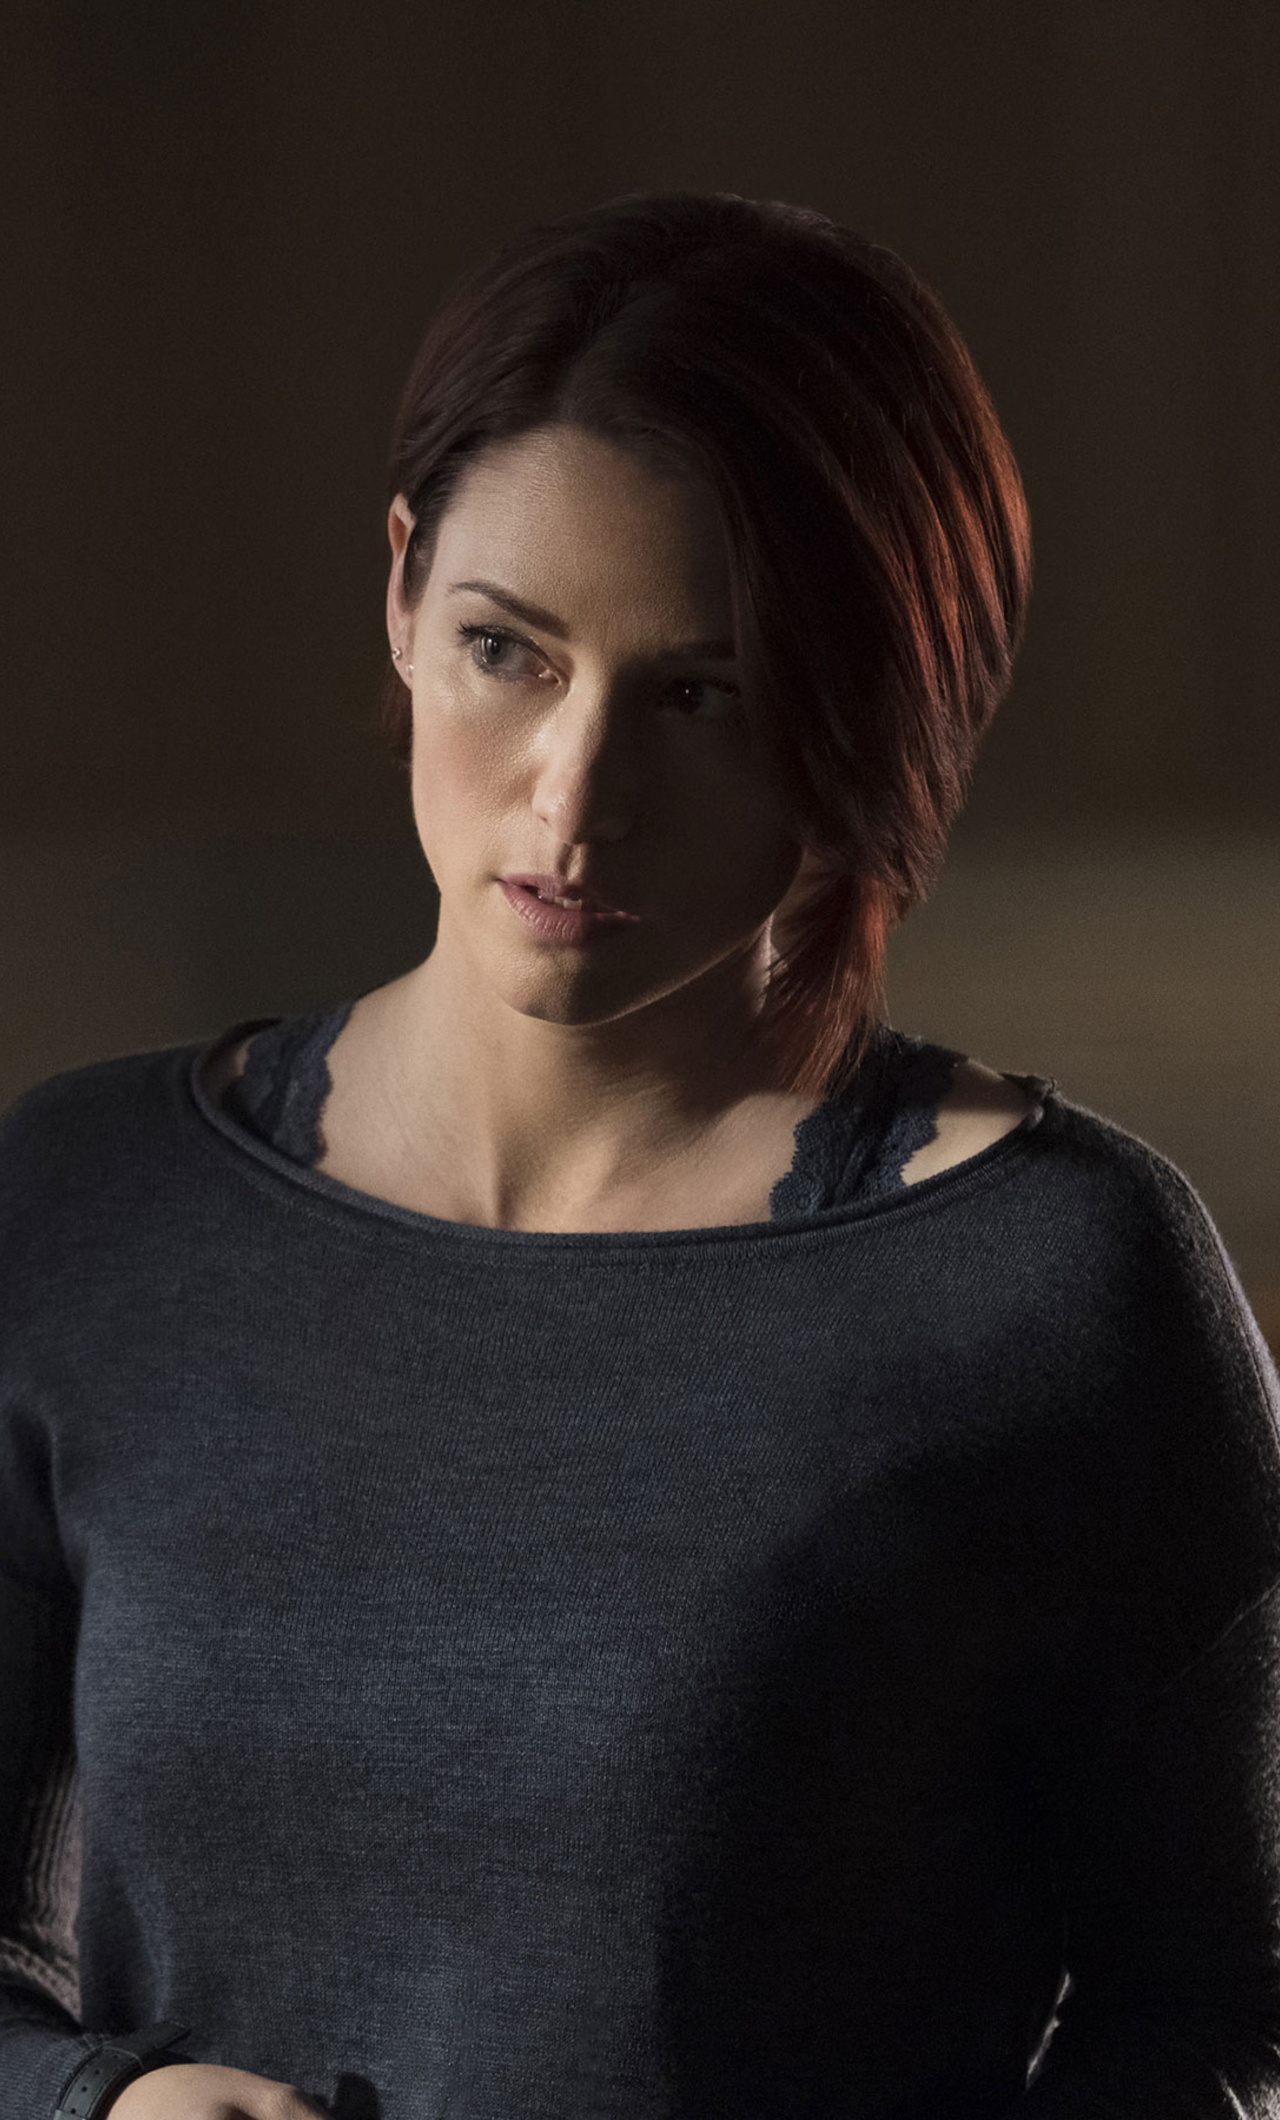 Chyler Leigh As Alex Danvers Supergirl Tv Series In 1280x2120 Resolution. c...